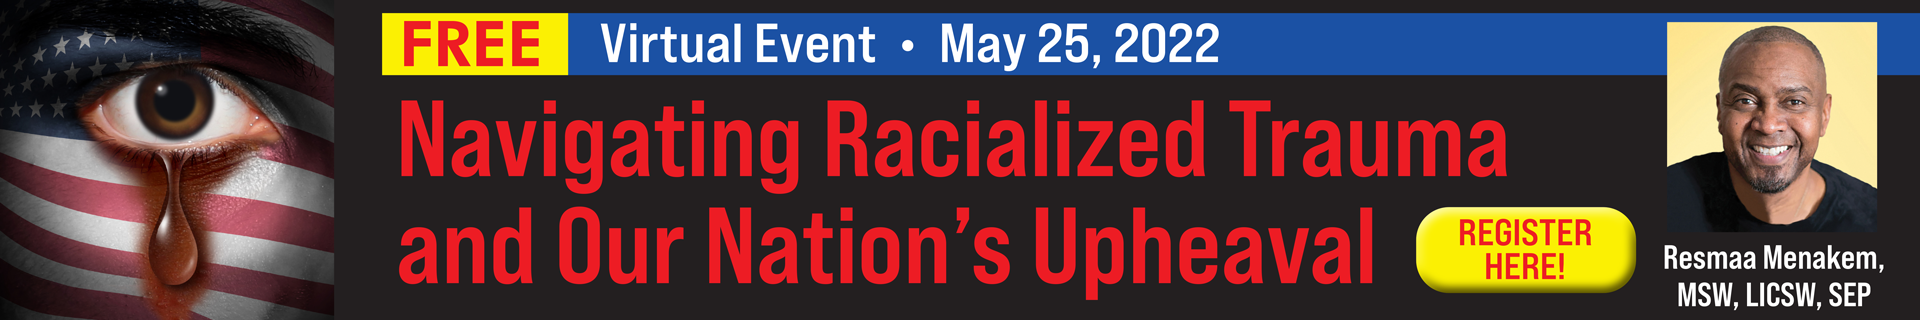 Navigating Racialized Trauma and Our Nation's Upheaval